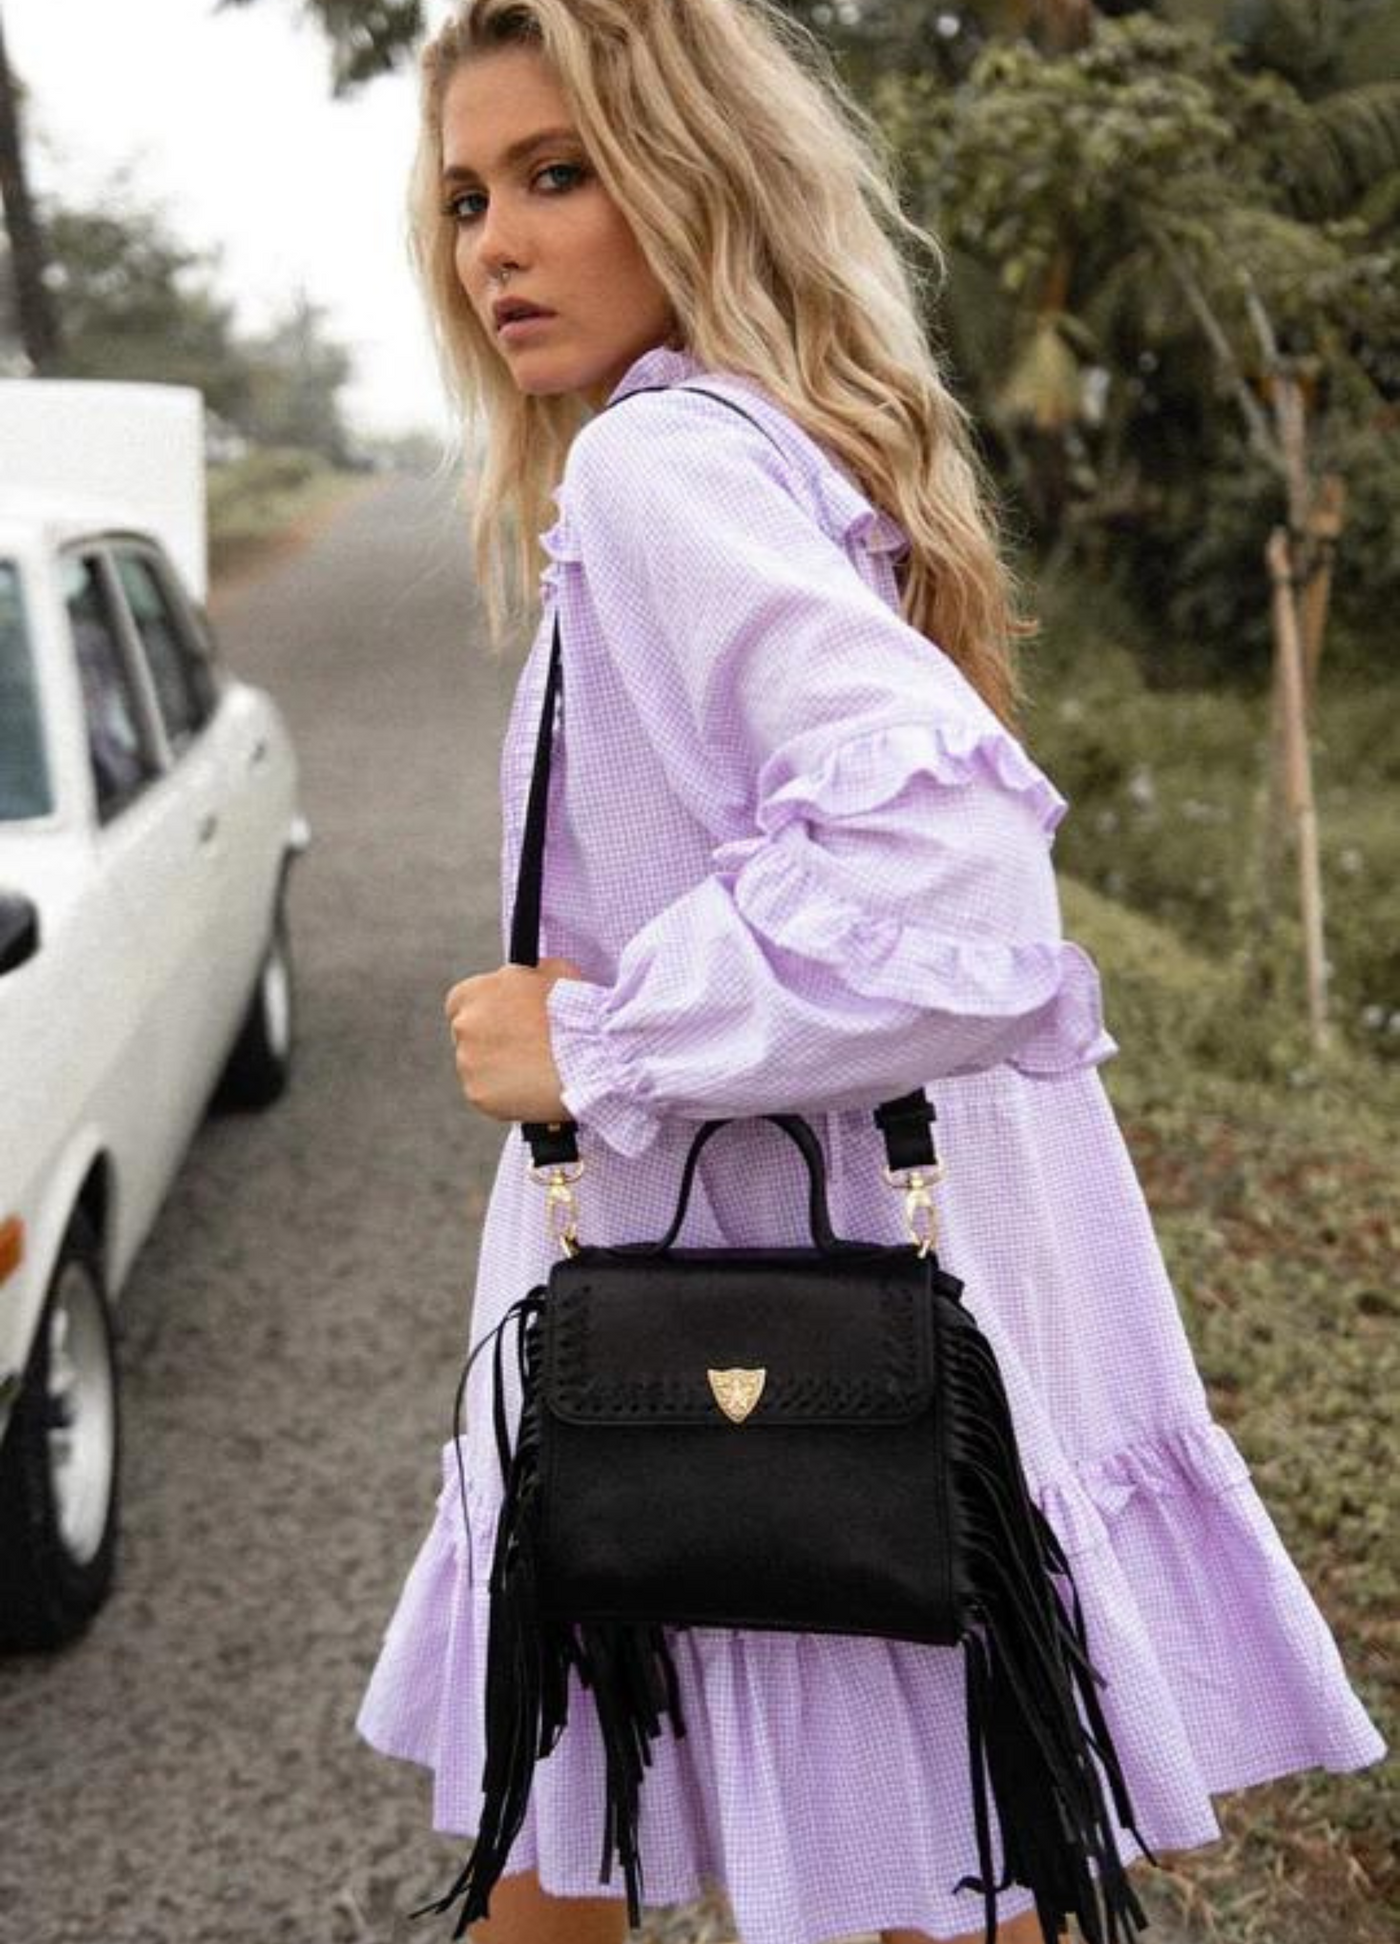 The Innerbloom black bag made in leather with fringing